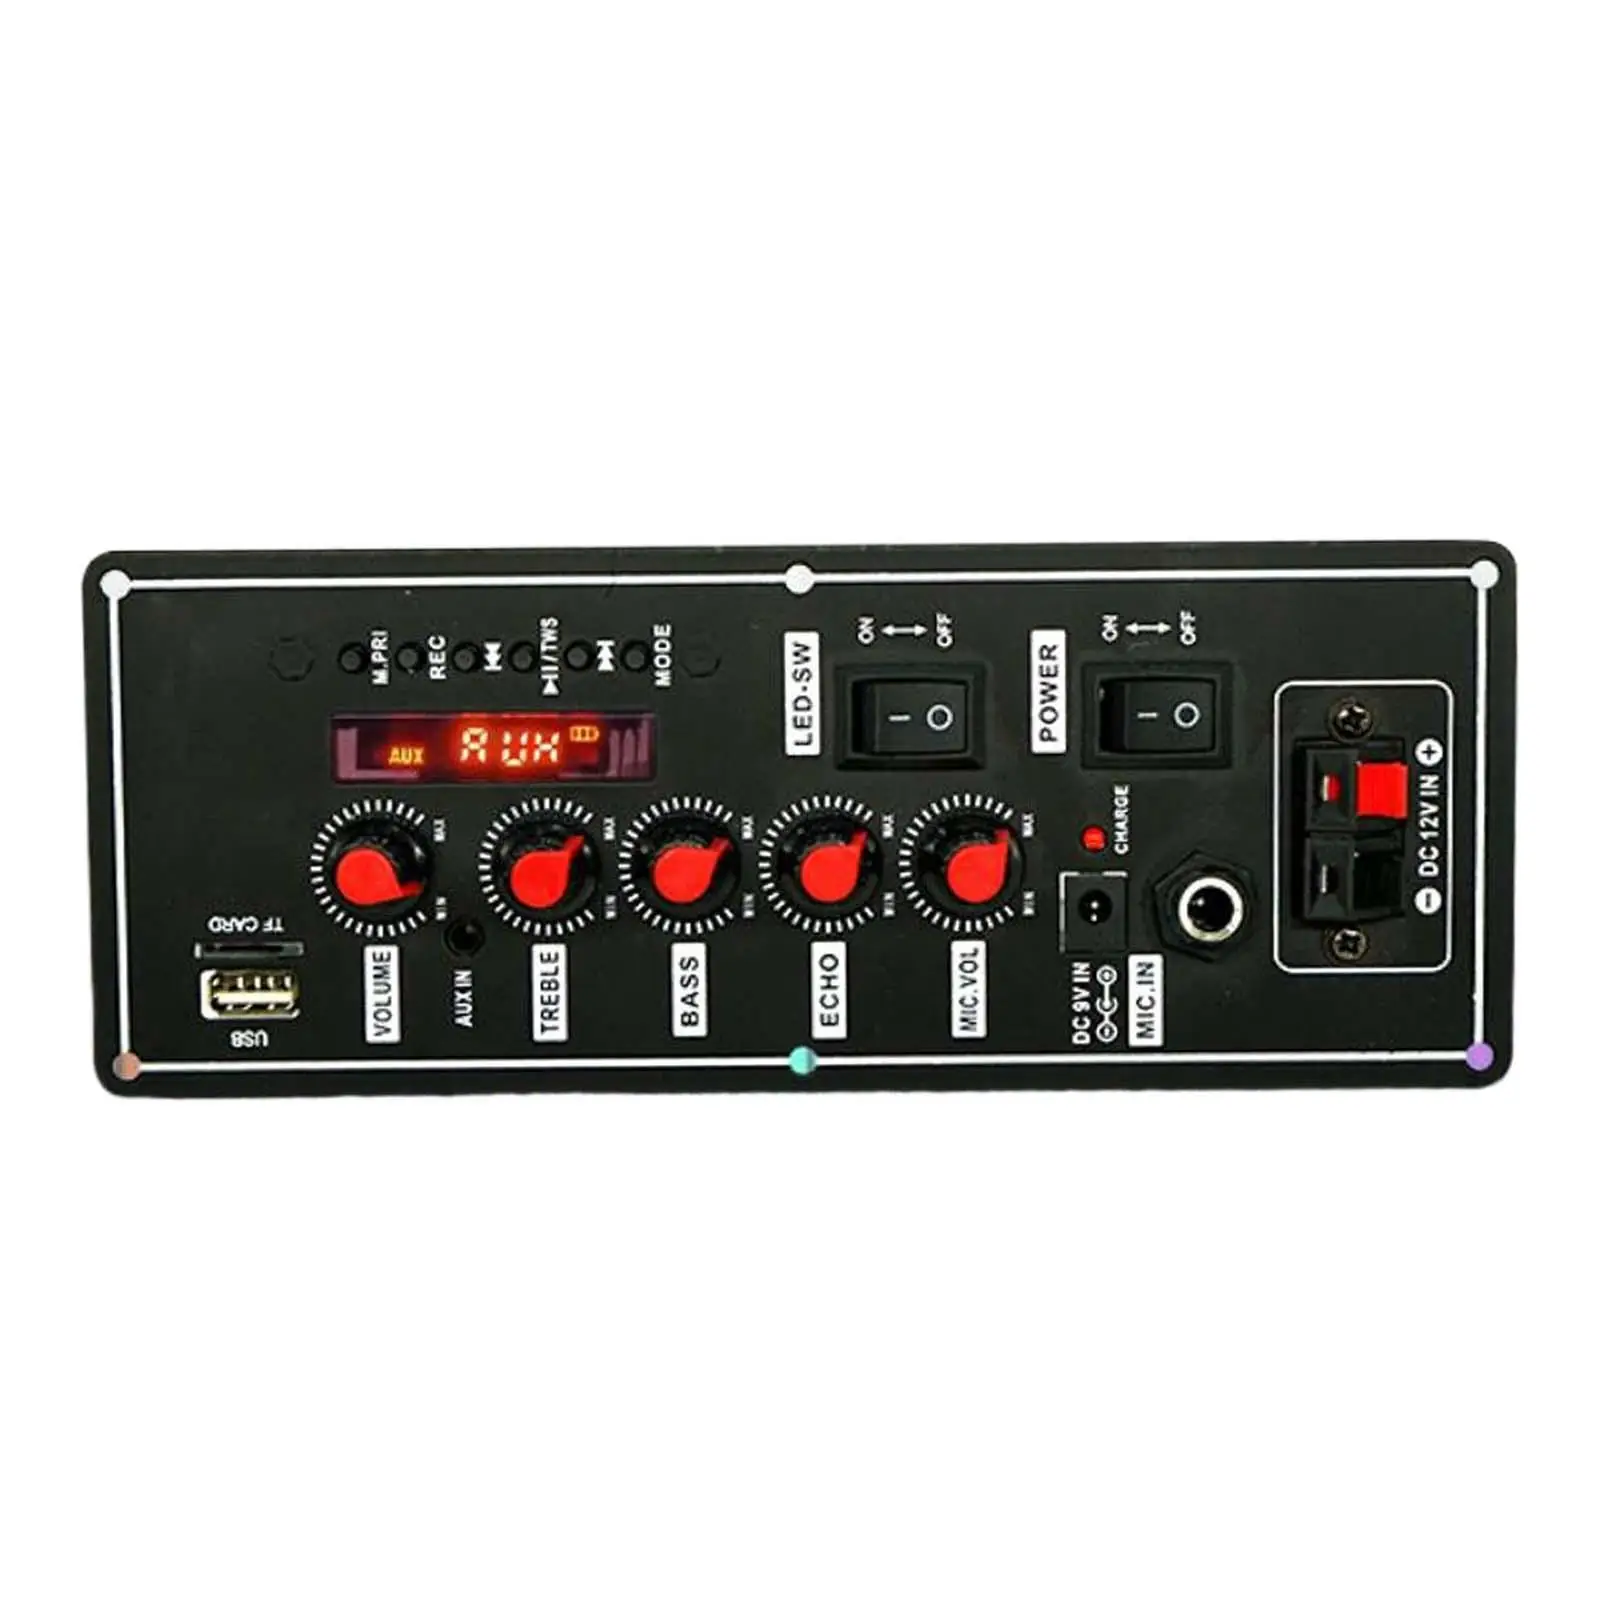 MP3 Decoder Board Support TF Card, USB, FM Radio AUX DC 9V Lossless MP3/WMA/WAV/flac/ape Replacement with Recording Function